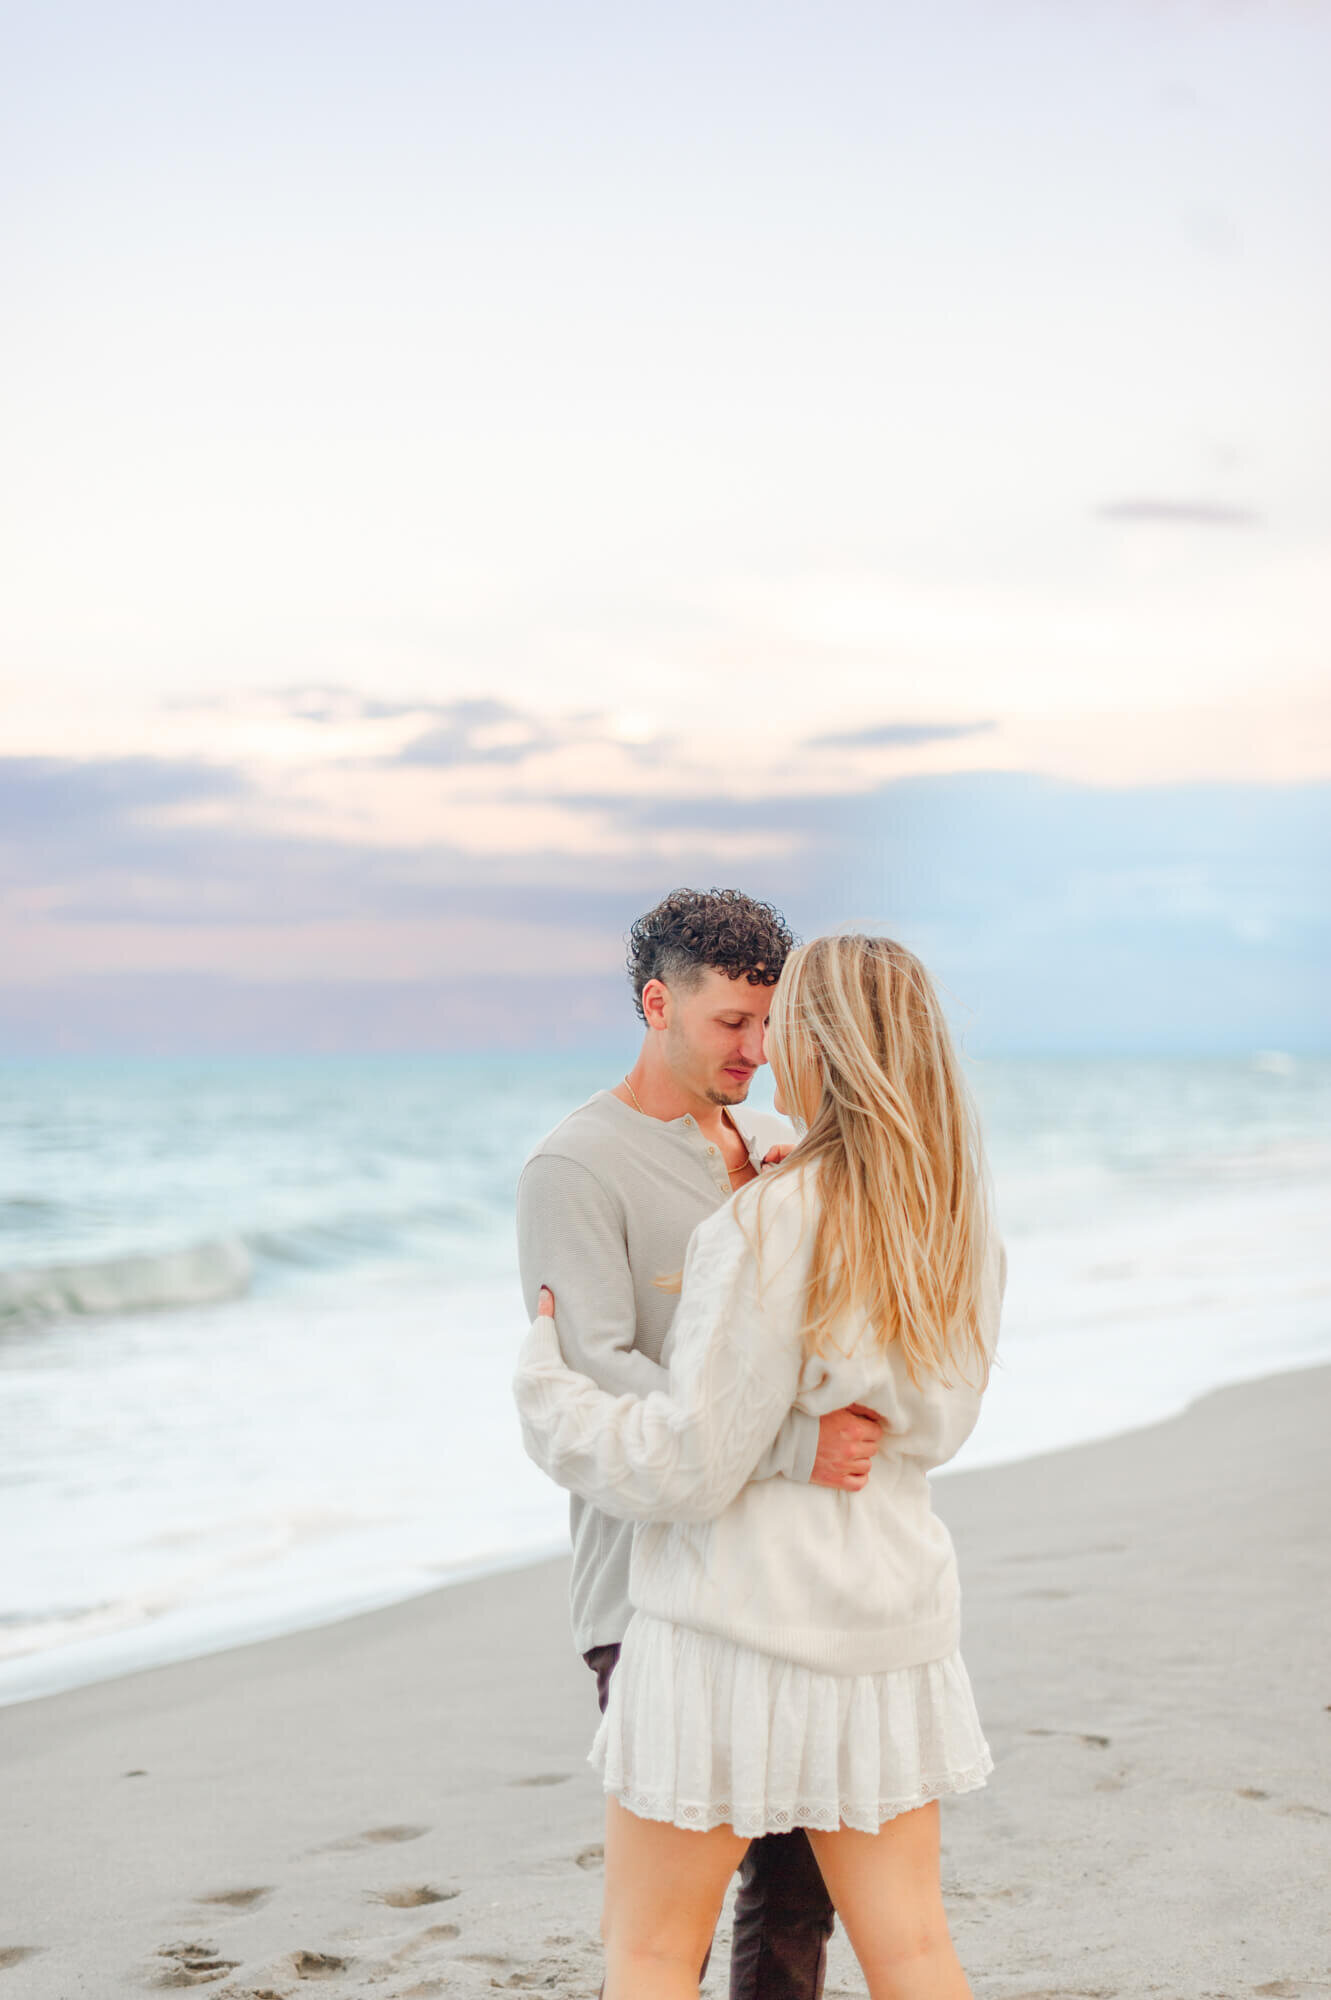 Couple embracing on the beach near the shoreline while the sunset